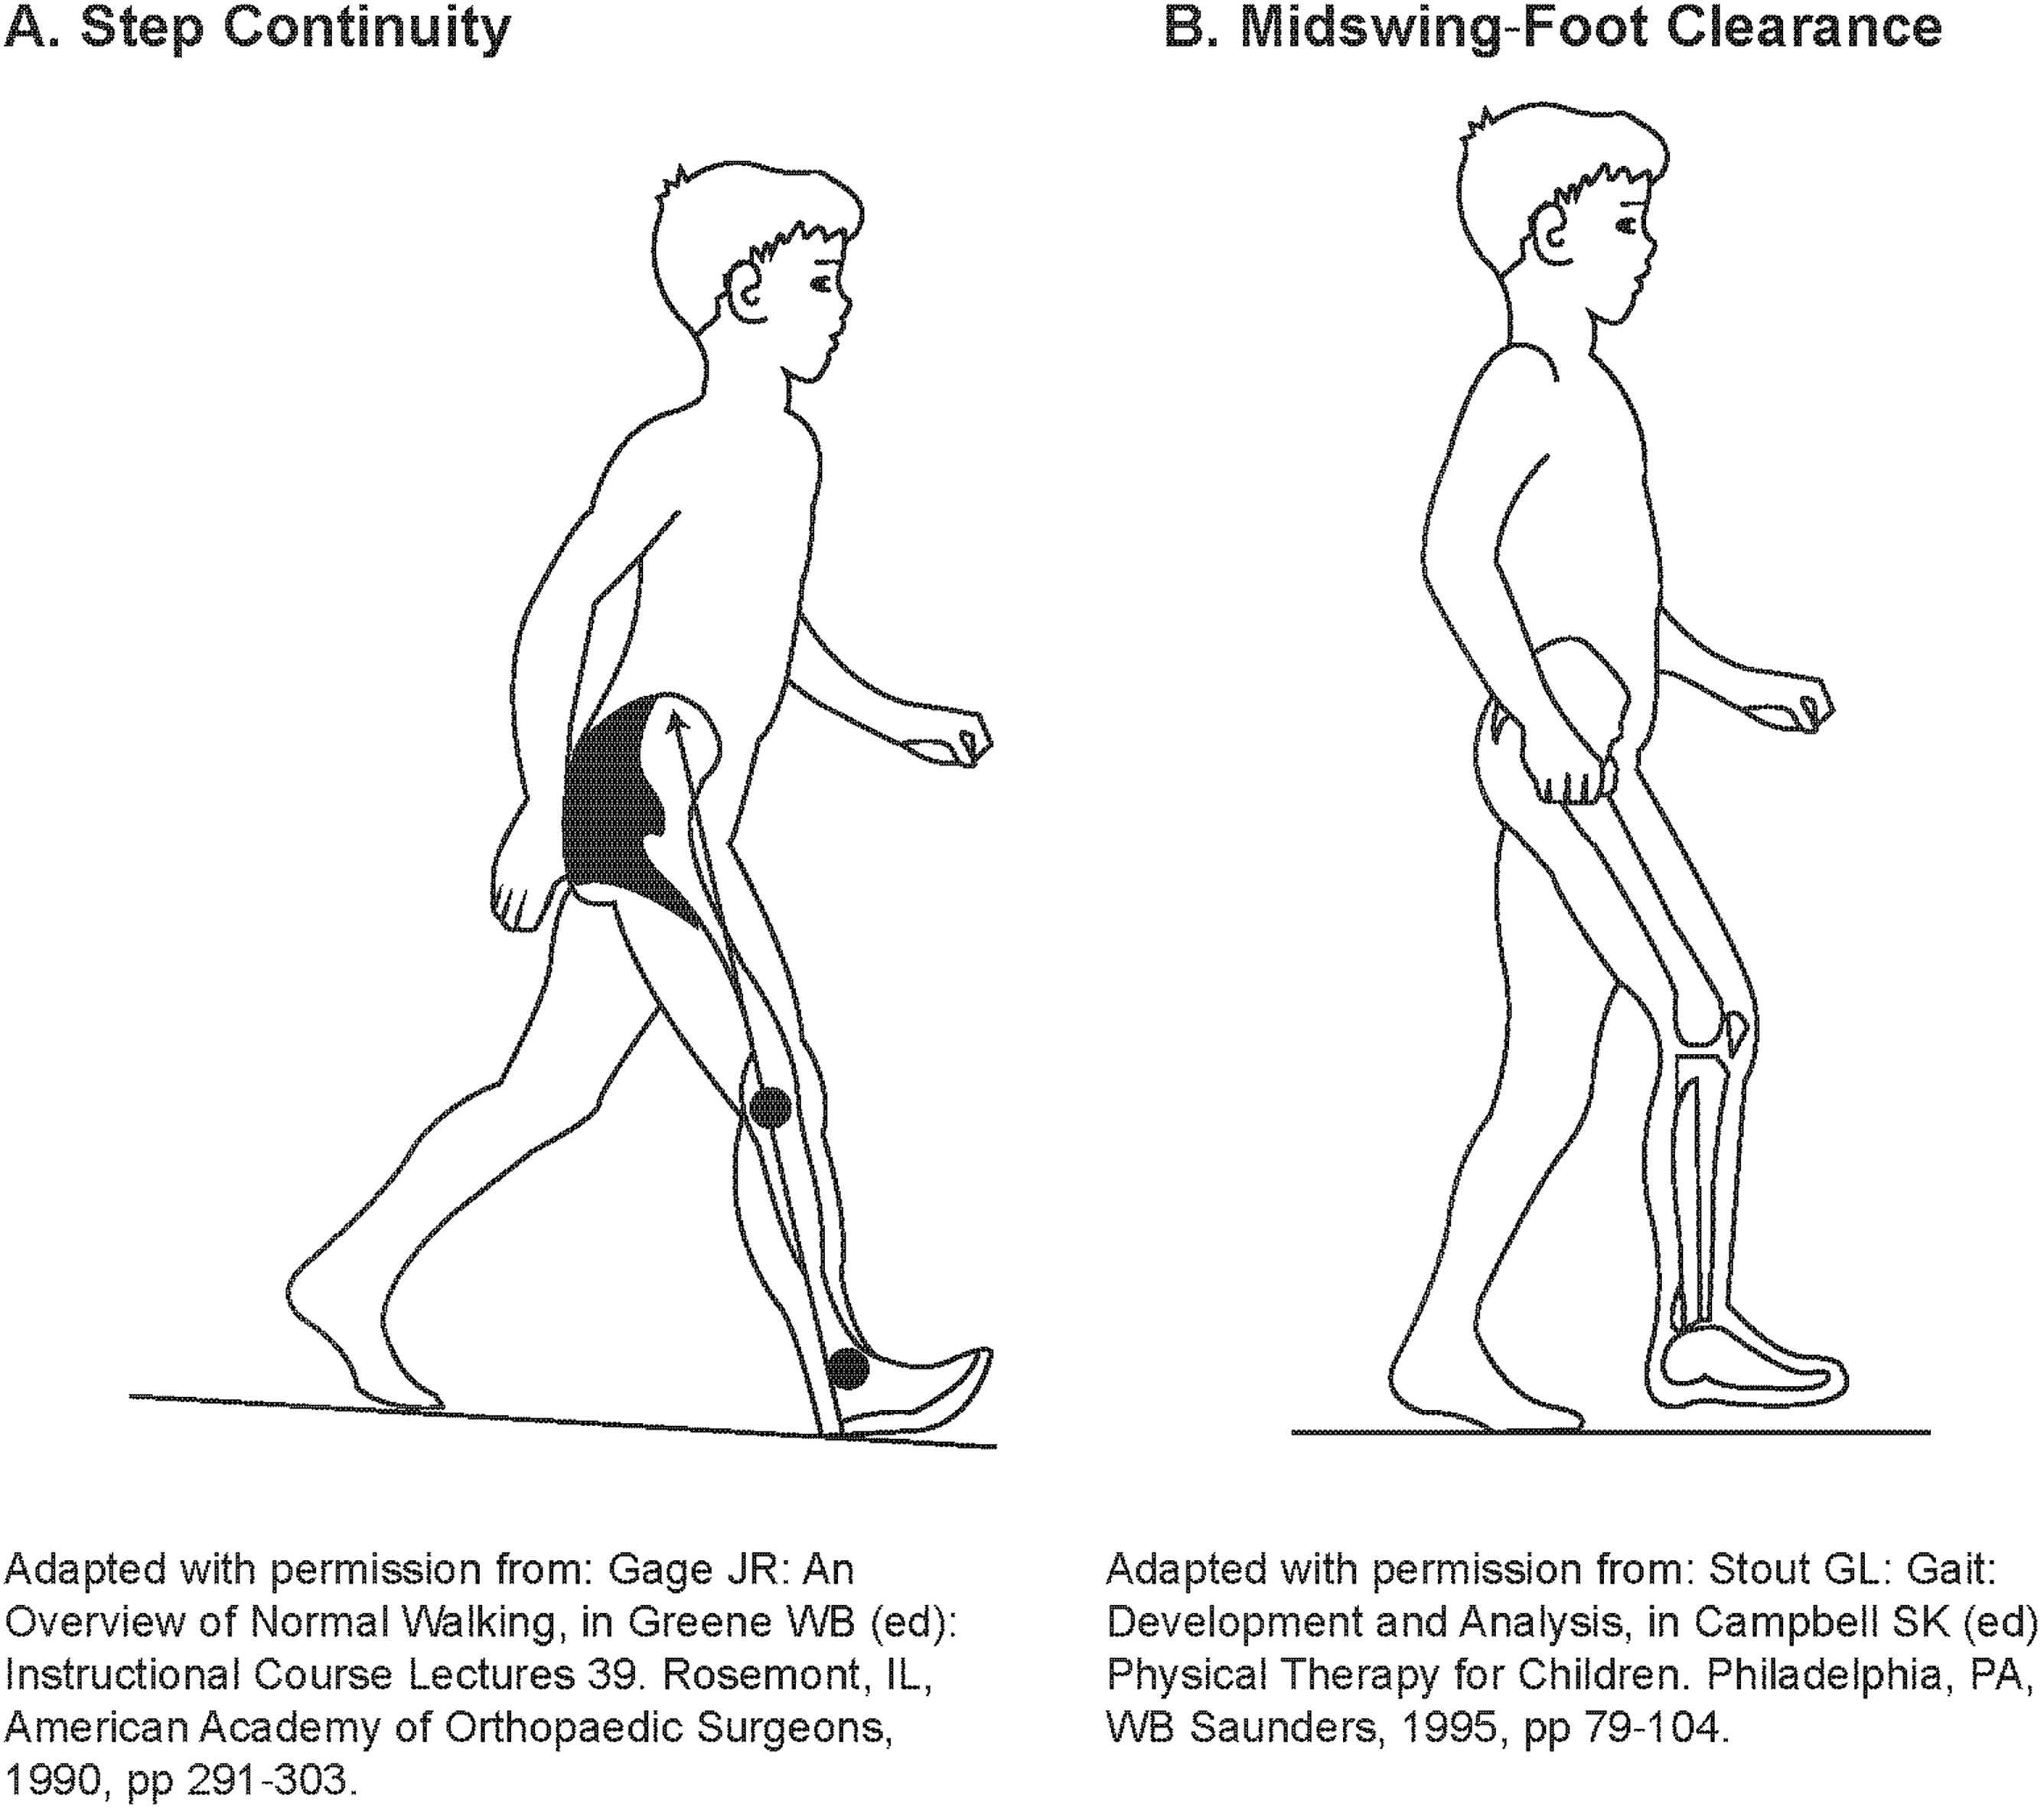 Example of step continuity and hip/knee flexion during swing for reference during rating. 